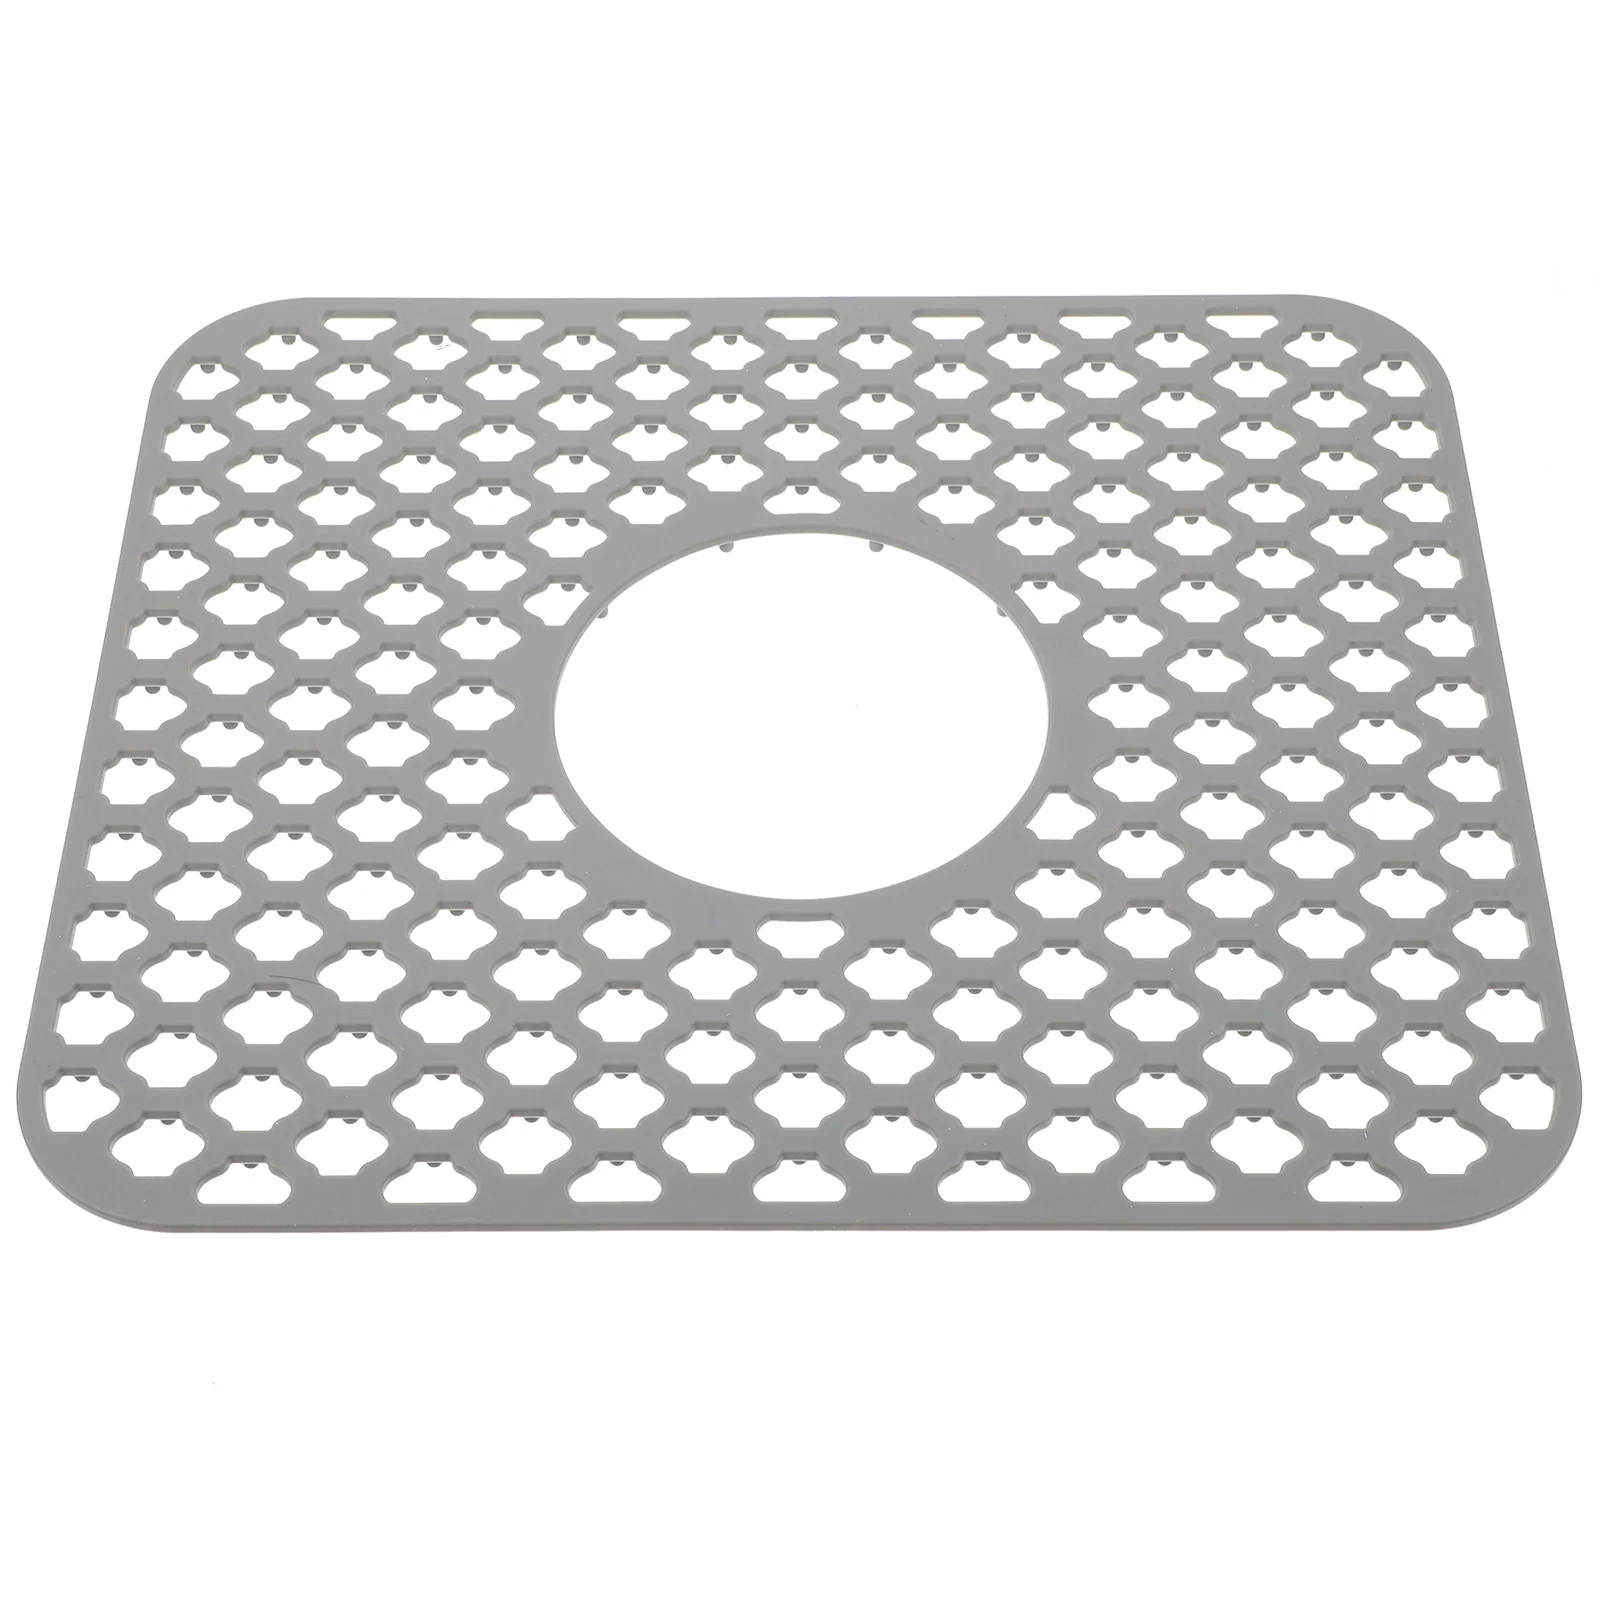 

Sink Mat Antiskid Kitchen Silicone Guard Mats Drain Drying Draining Protectors Cushion Hollow Pad Dish Drip Pads Cleaning Filter